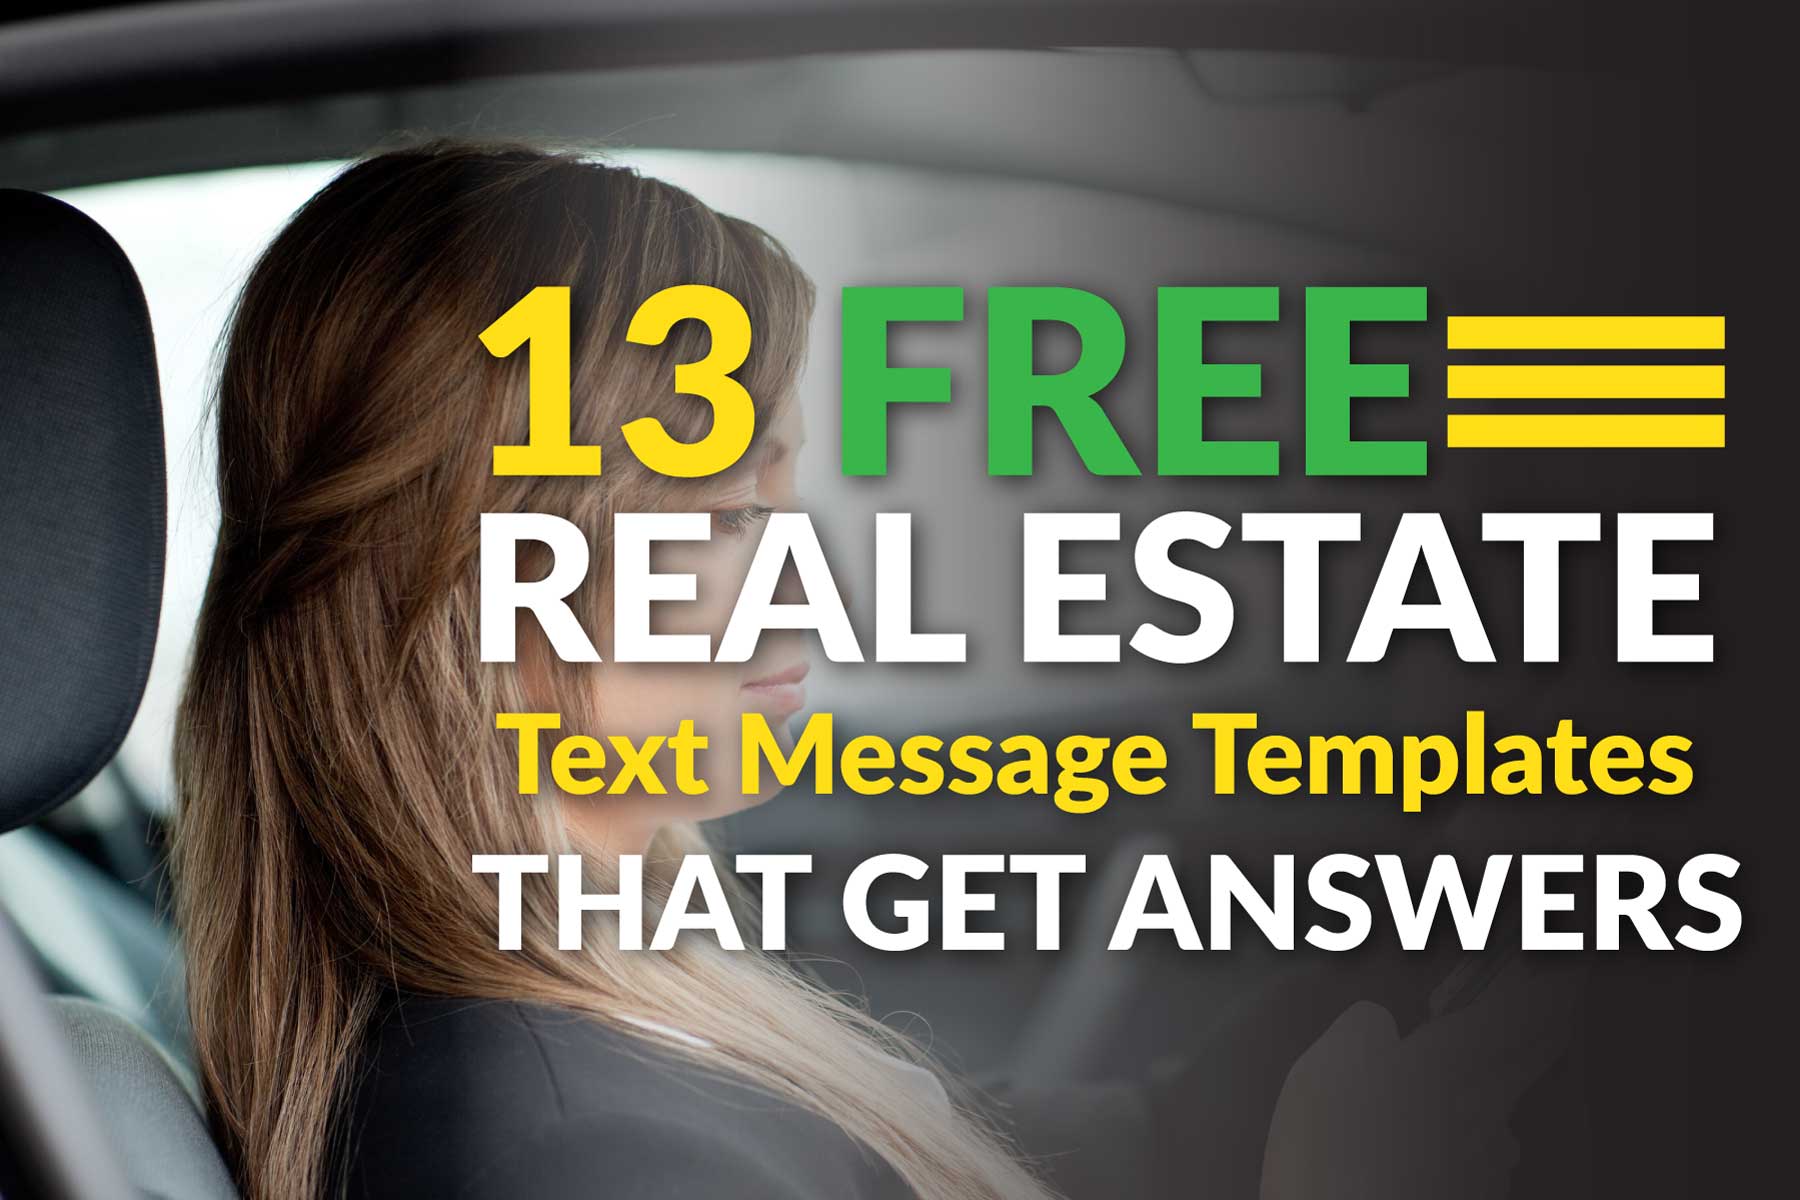 13-free-real-estate-text-message-templates-that-get-you-answers